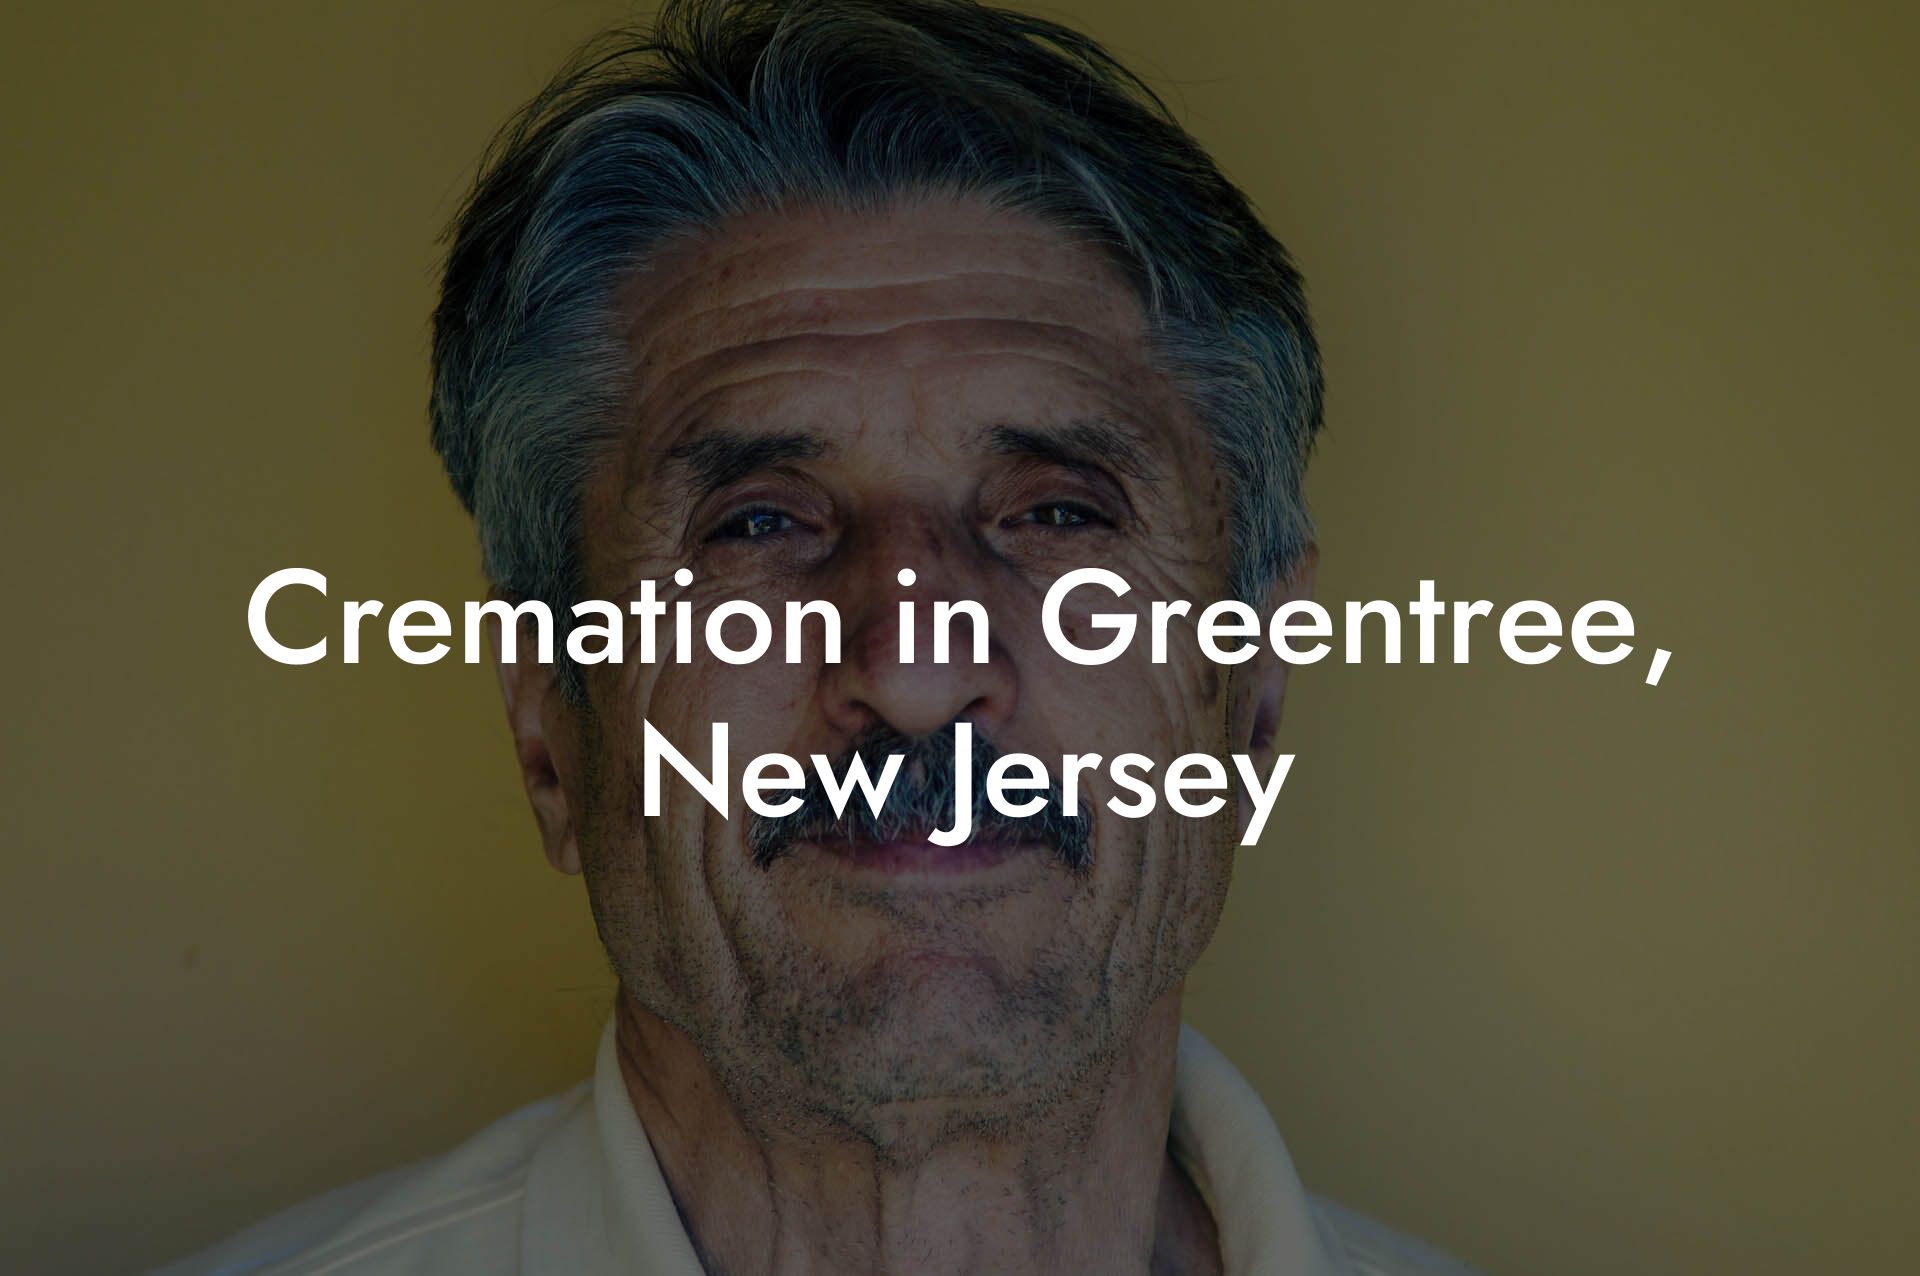 Cremation in Greentree, New Jersey